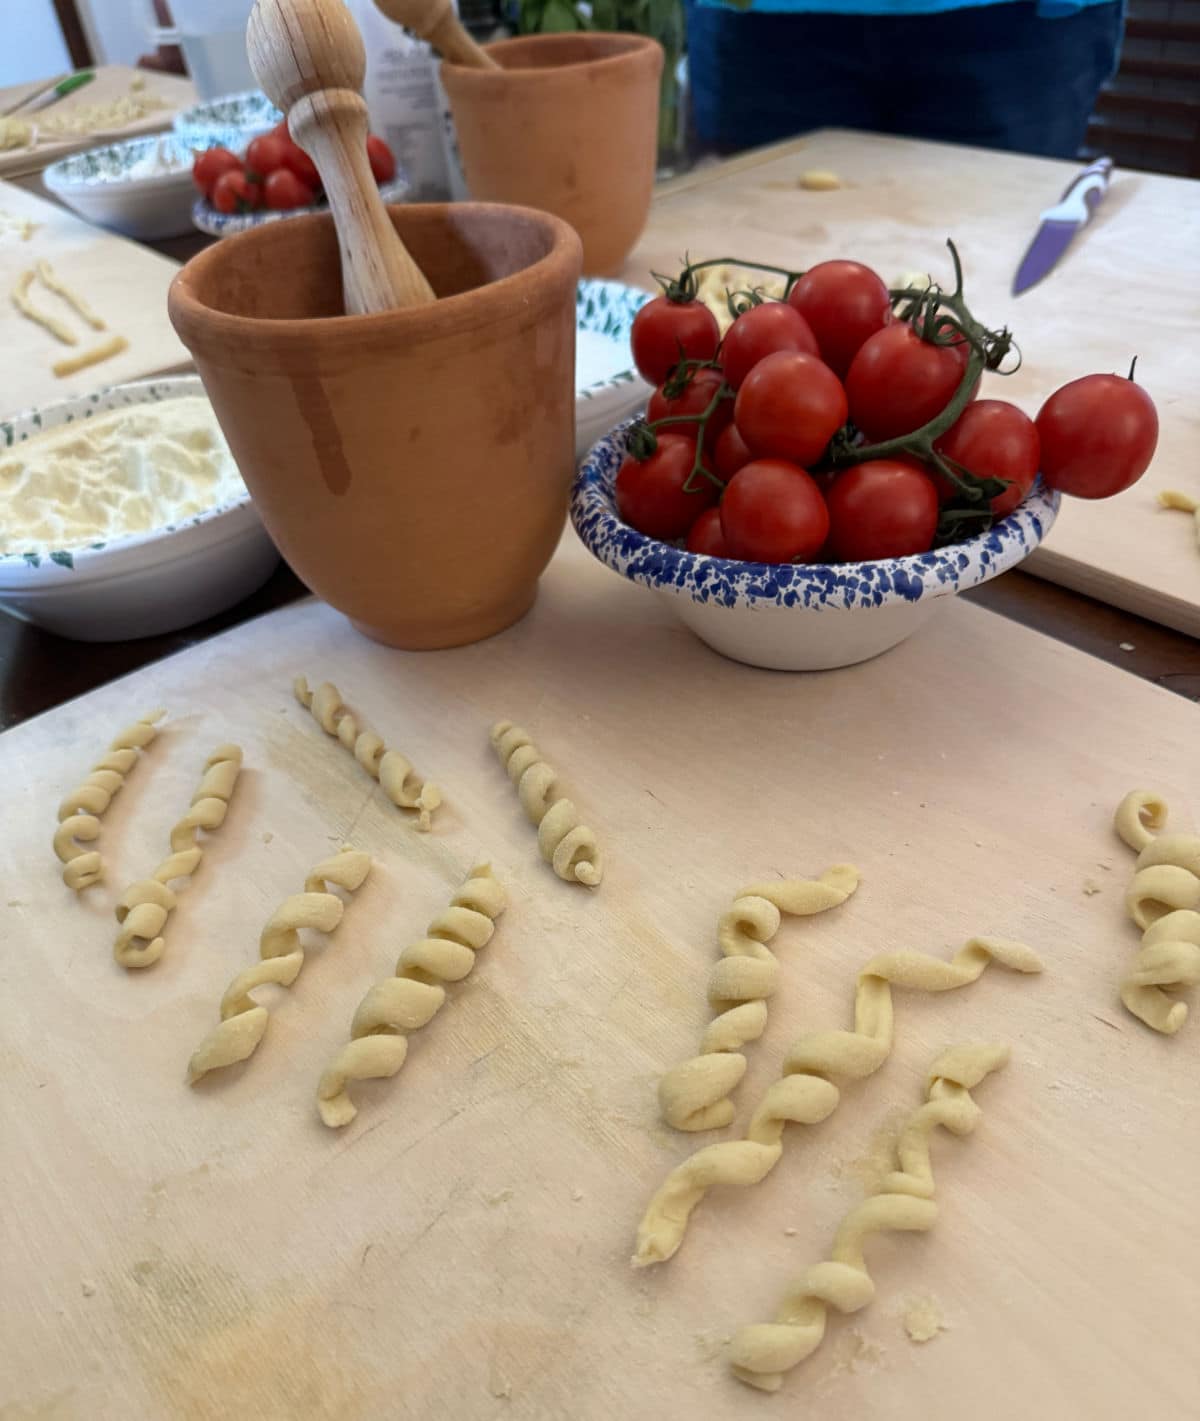 Mortar and pestle on a table with tomatoes and pasta.